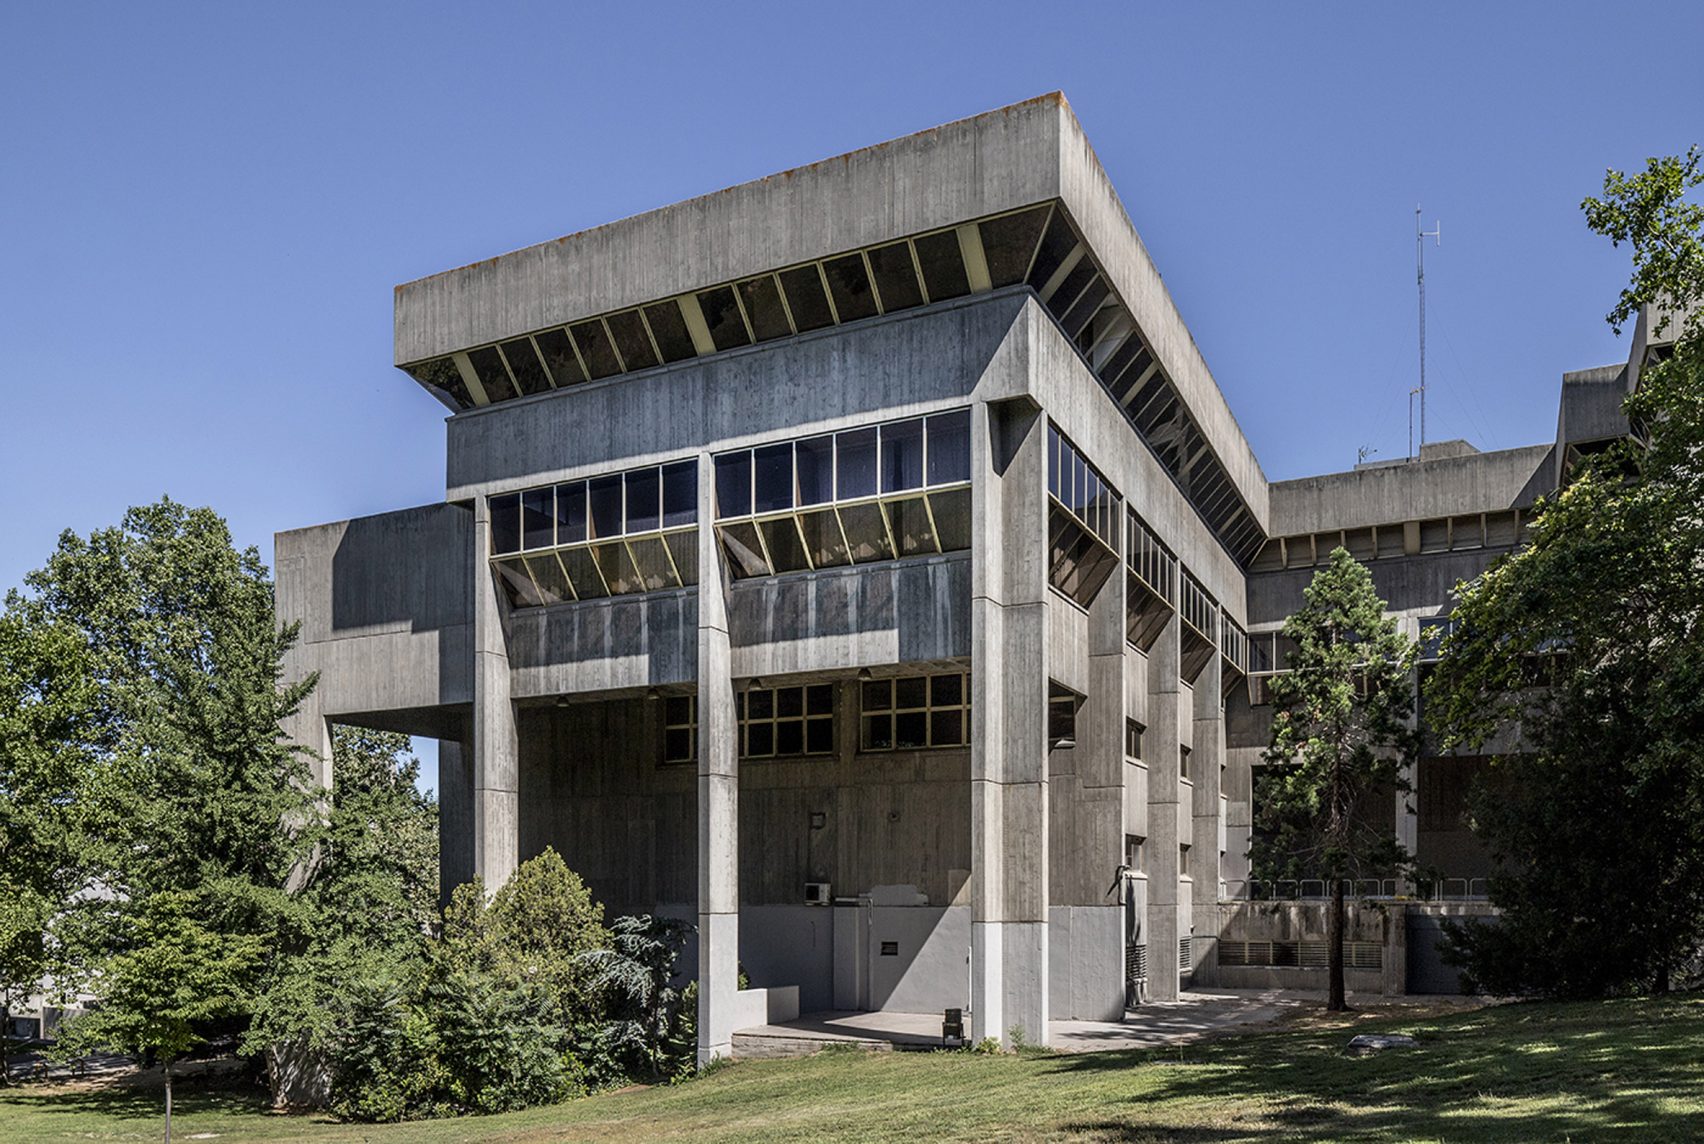 Department of Information Sciences from 1971, Madrid. From Dezeen